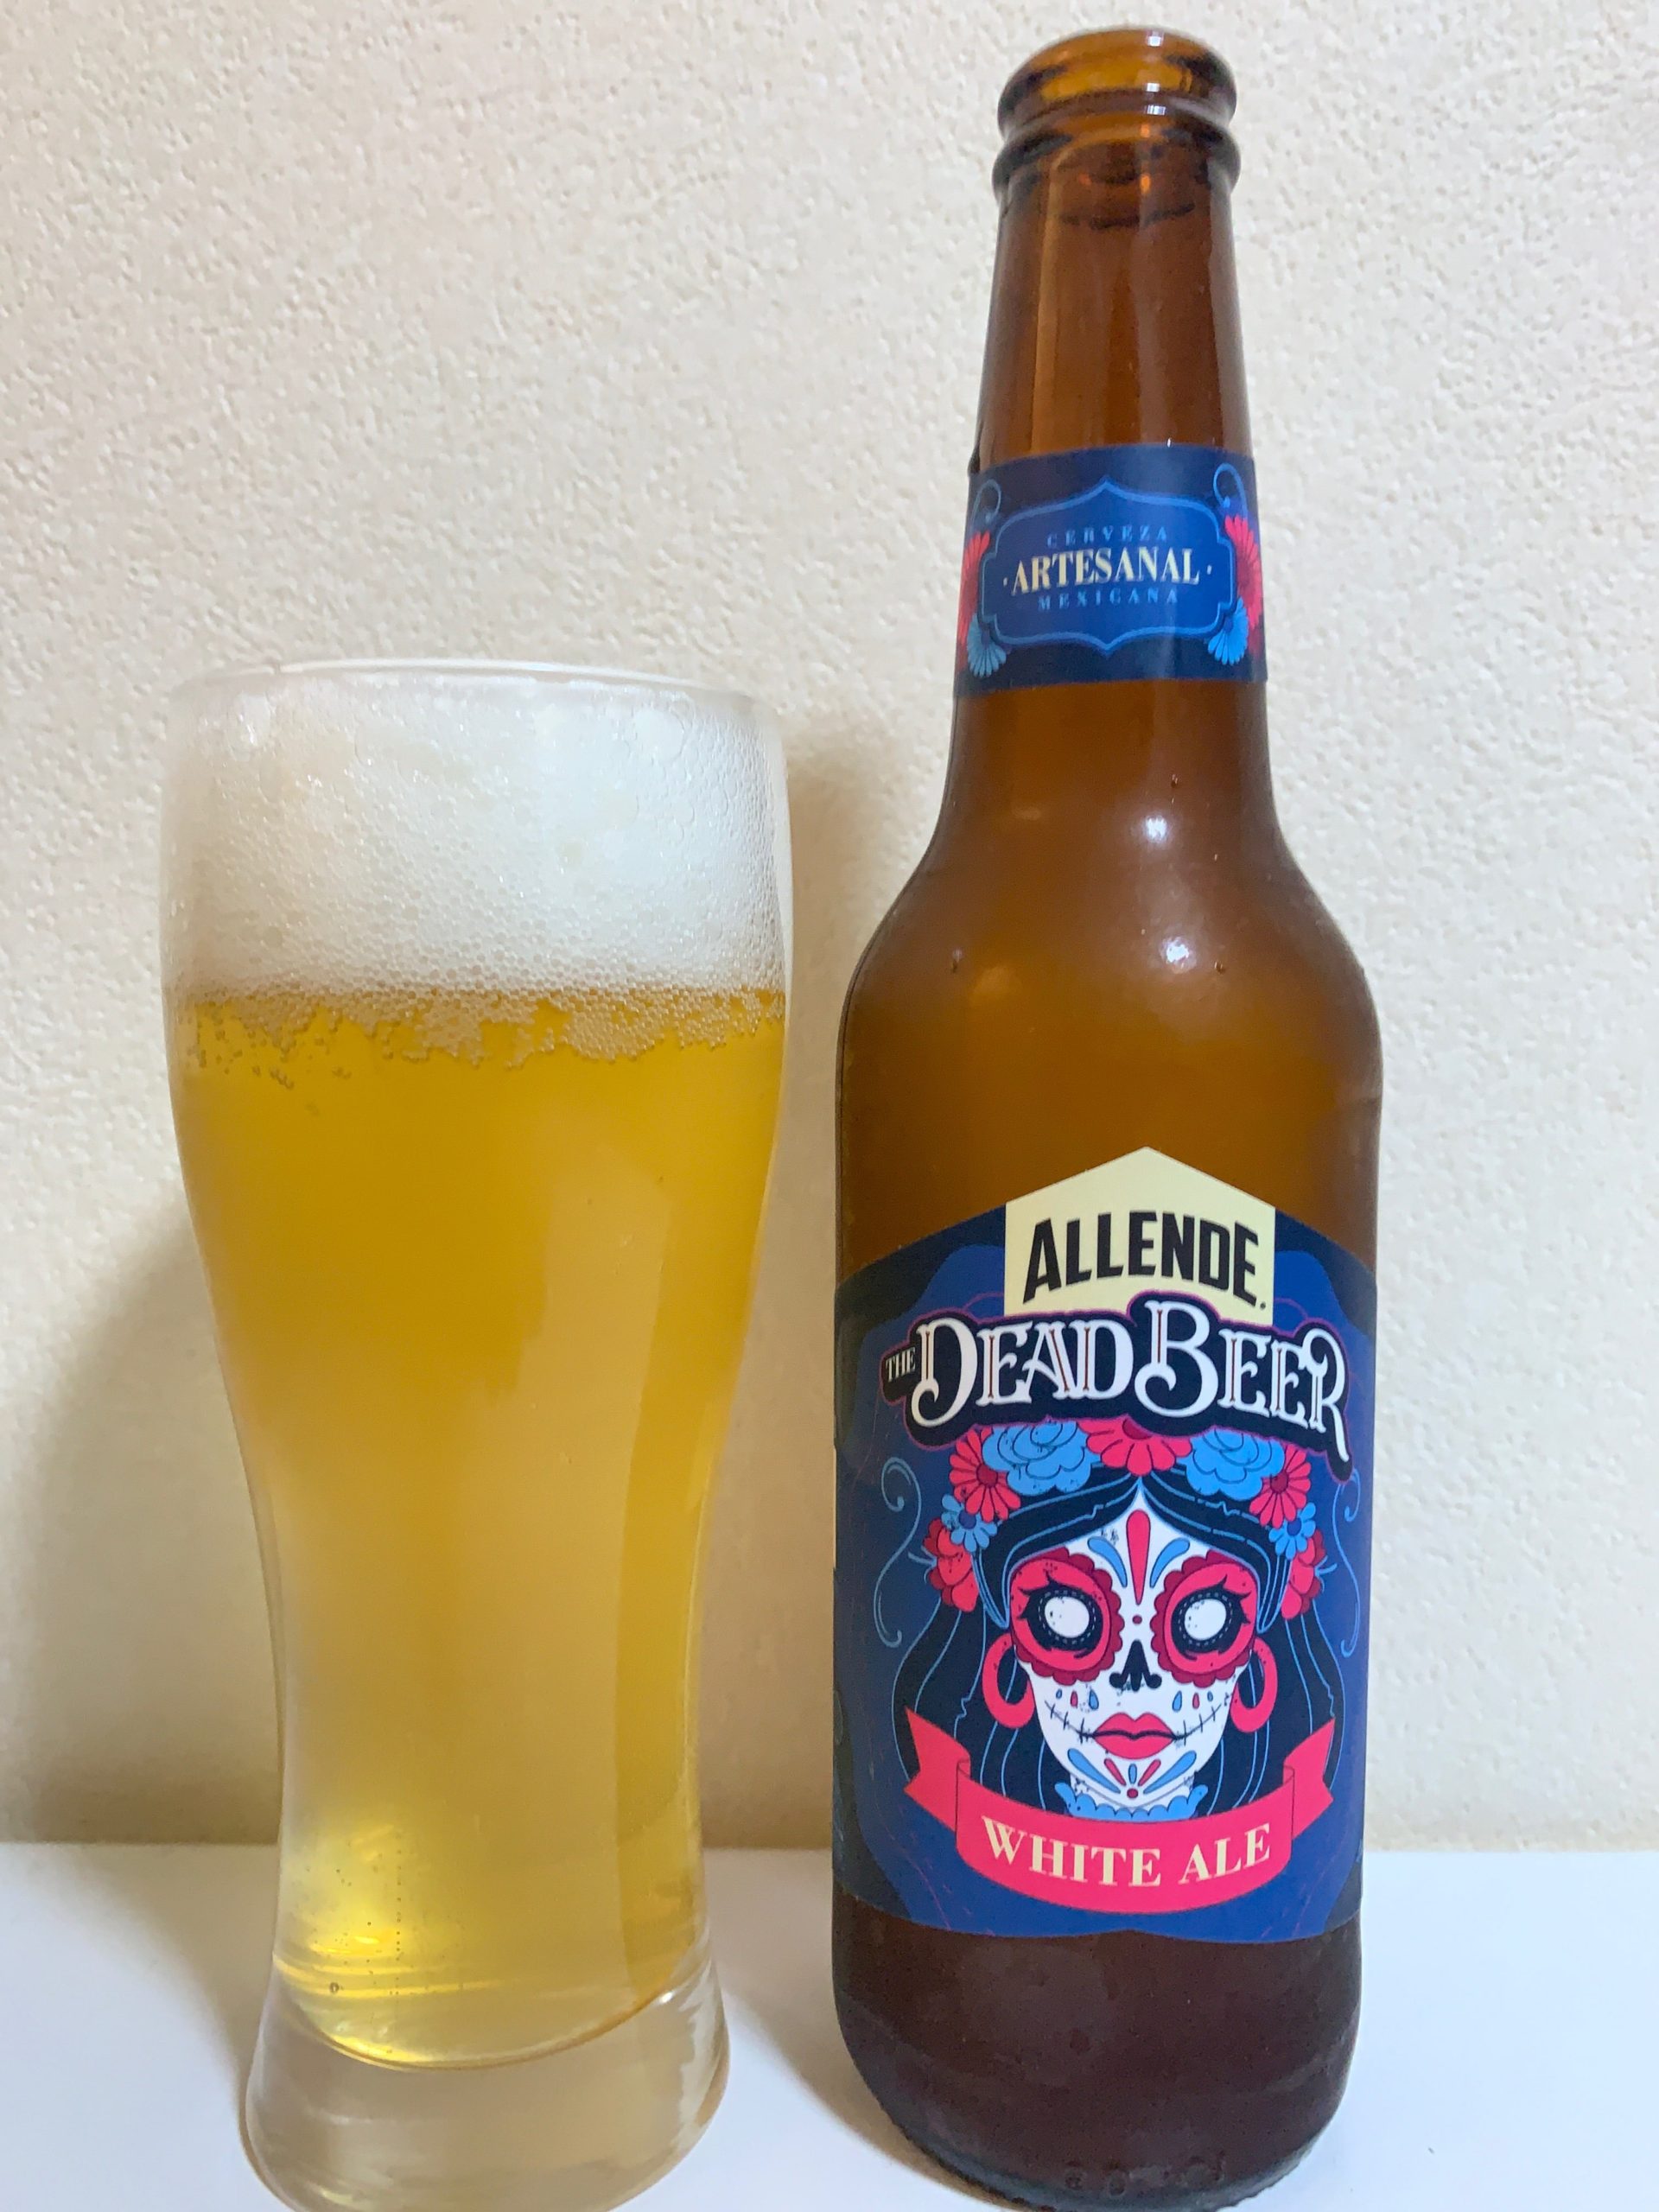 ALLENDE THE DEAD BEER WHITE ALE(アジェンデ ザ デッドビール ホワイトエール)